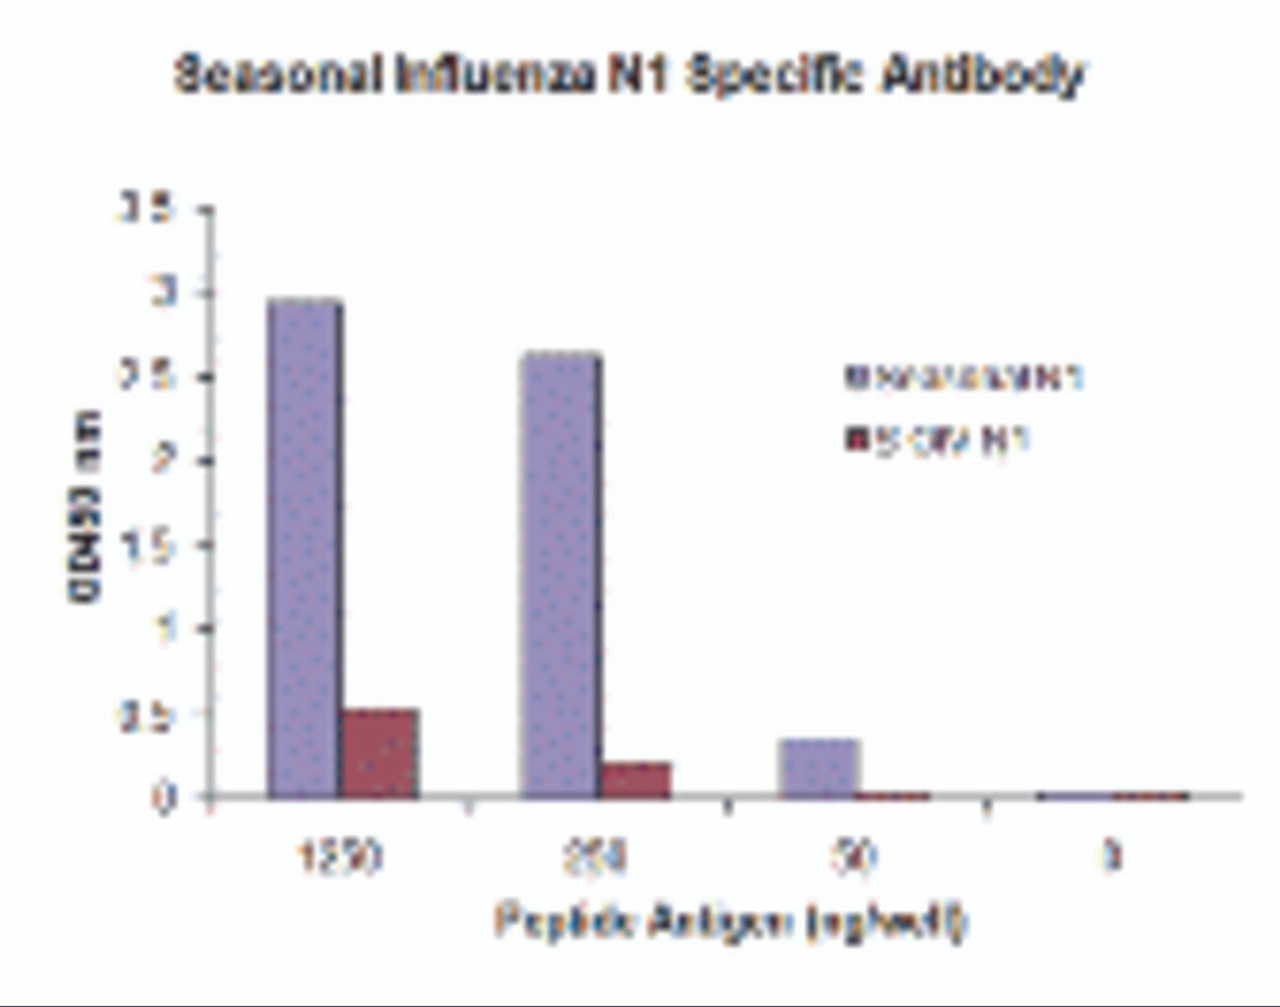 Seasonal influenza A N1 antibody (Cat. No. PM-5917) specifically recognizes seasonal (H1N1) N1, and does not cross-react with peptide corresponding to swine-origin influenza A (S-OIV, H1N1) N1 peptide, in ELISA.